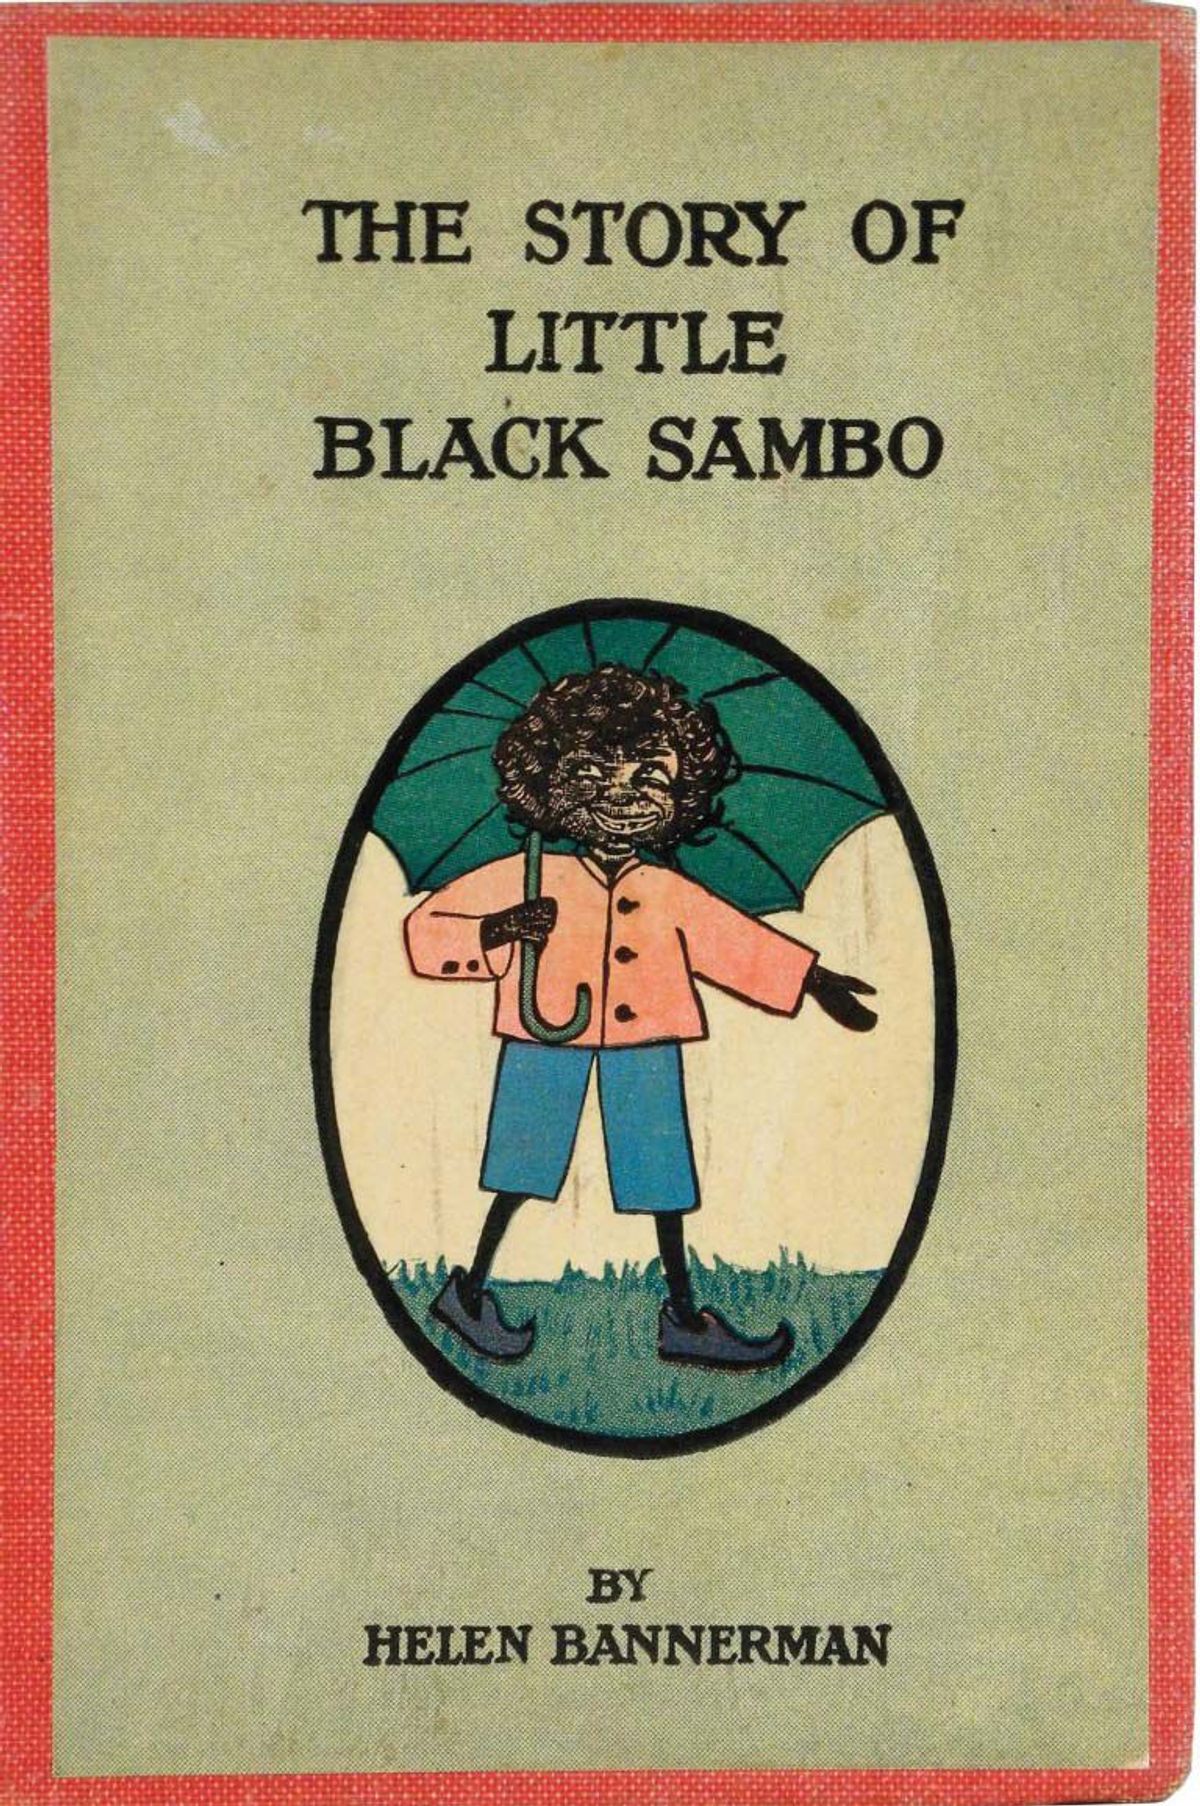 Have You Ever Heard Of 'Little Black Sambo'